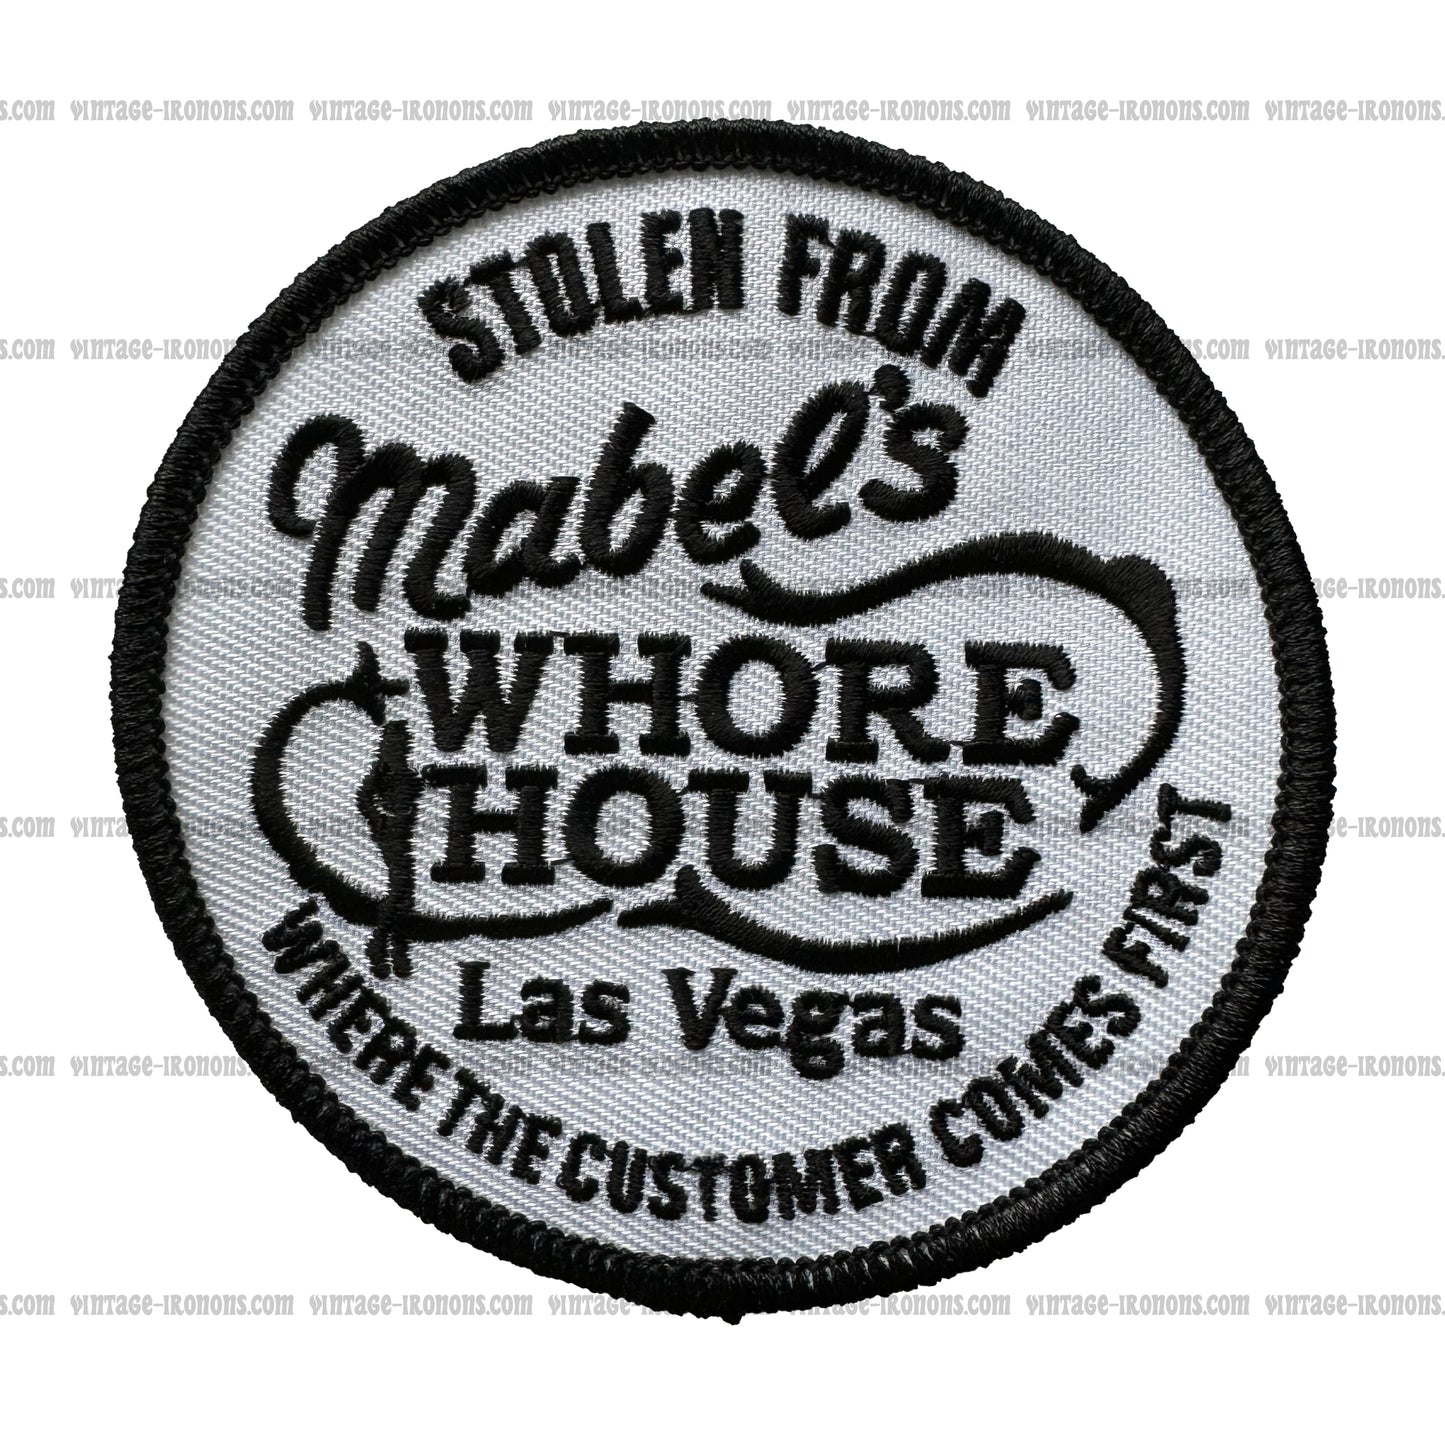 Stolen From Mabel's Whore House Las Vegas Vintage Patch